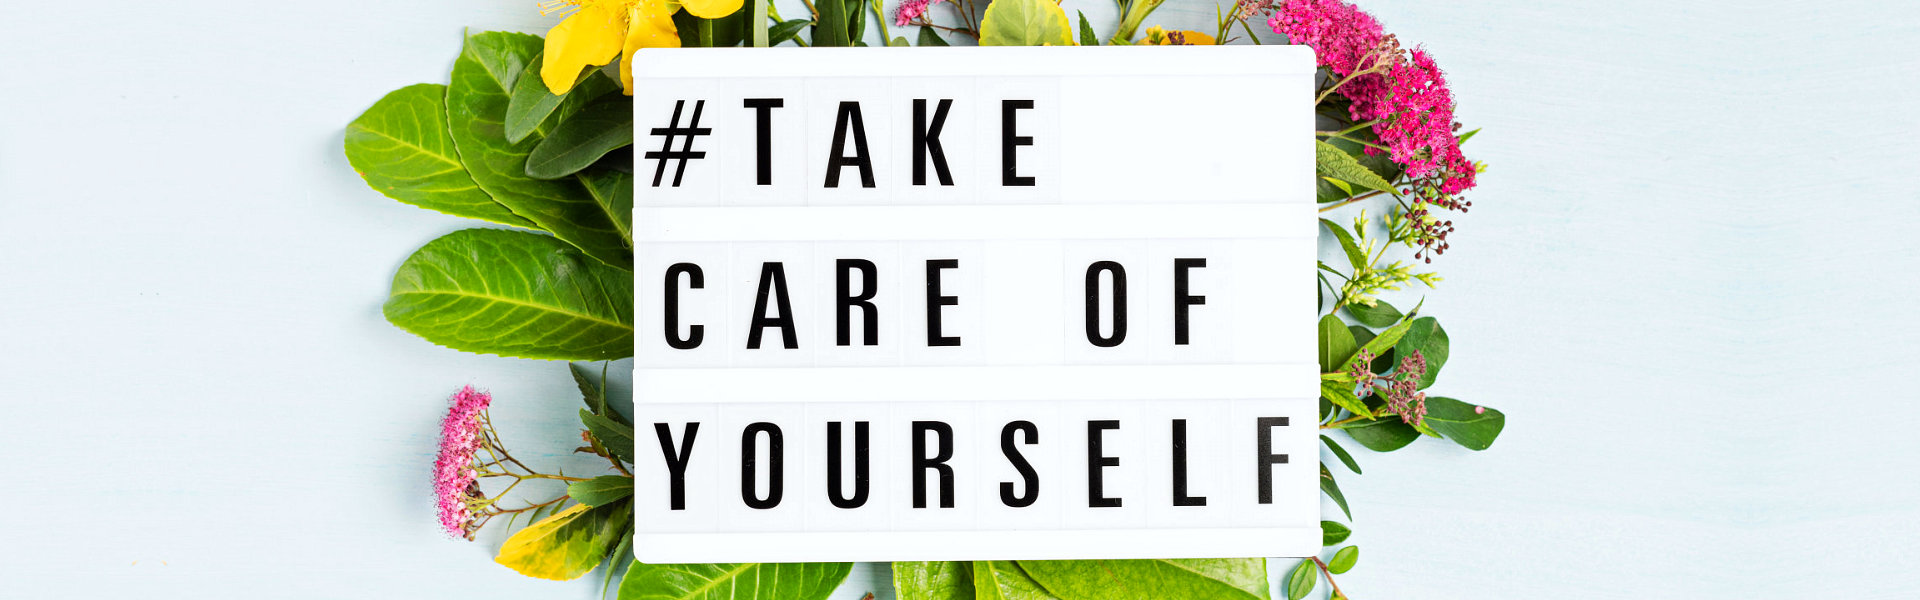 take care of yourself phrase